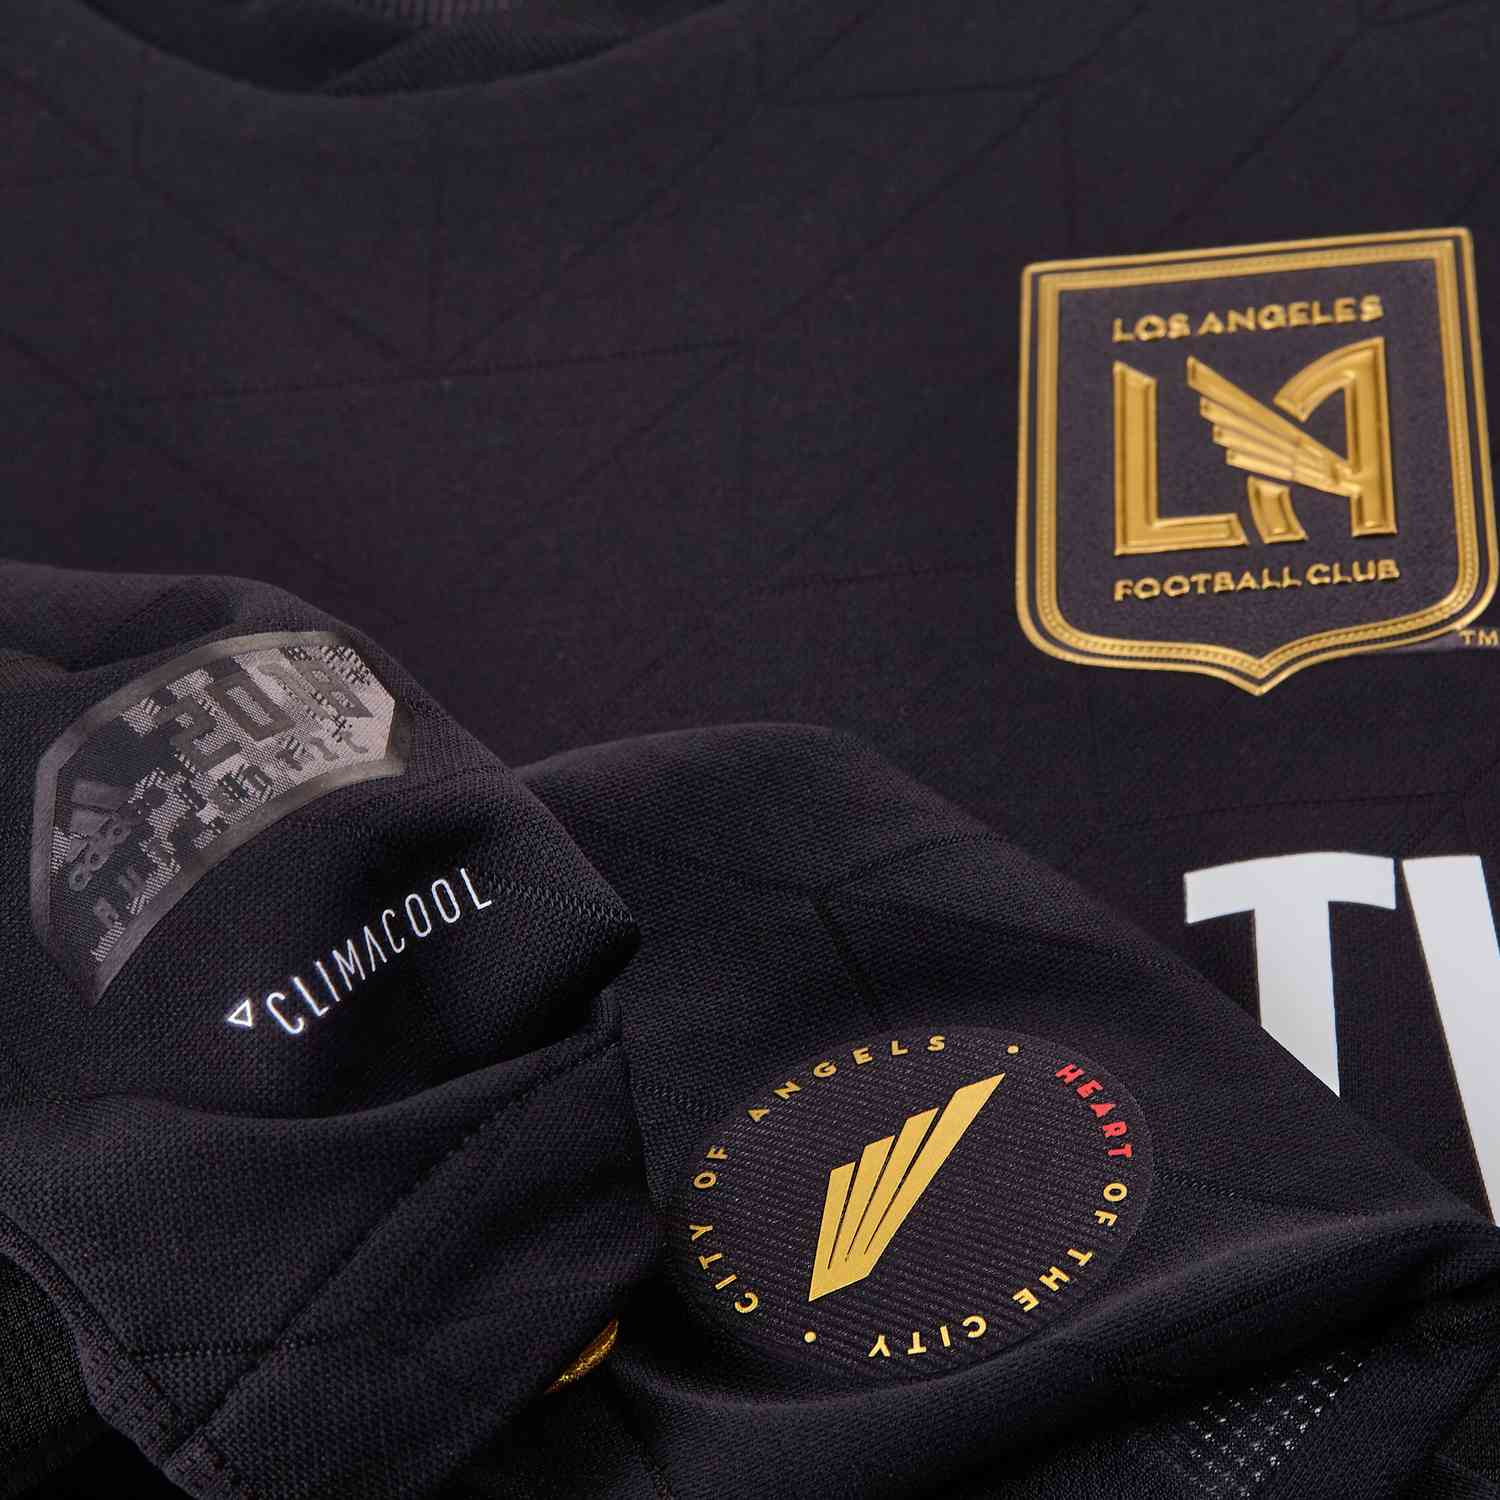 2018/2019 adidas LAFC Home Authentic Jersey - SoccerPro